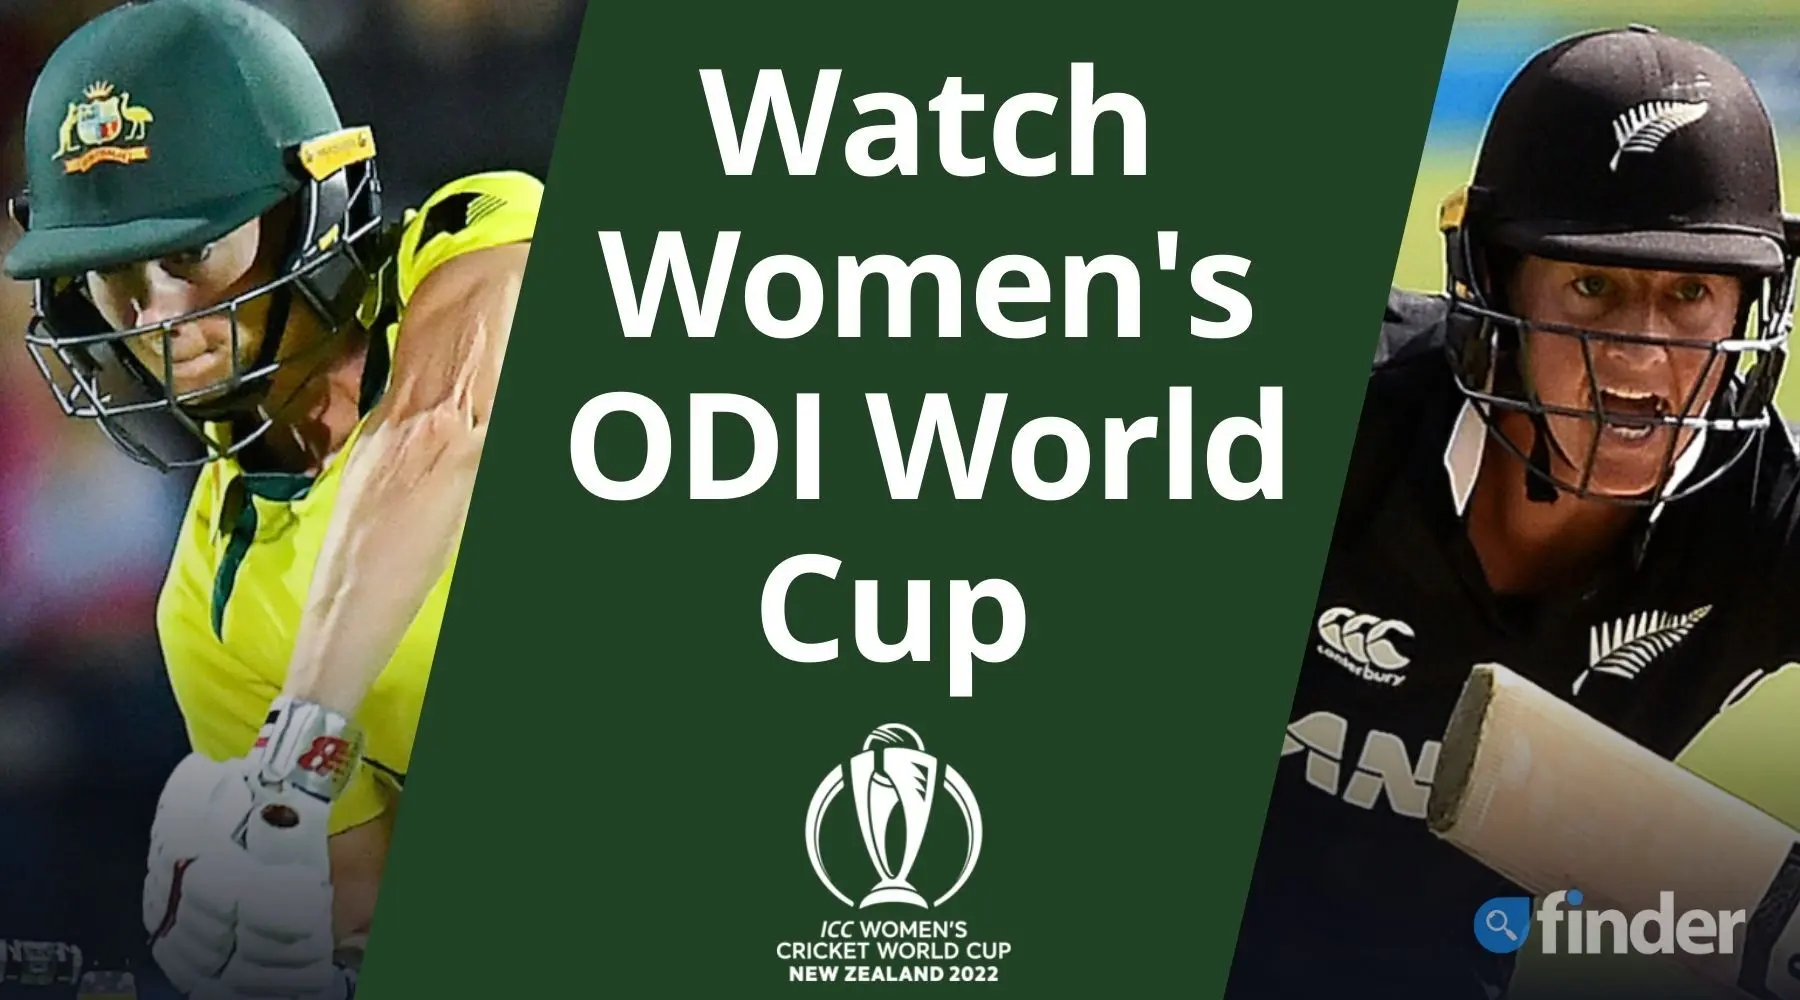 How to watch the Women's ODI World Cup live and free in Australia